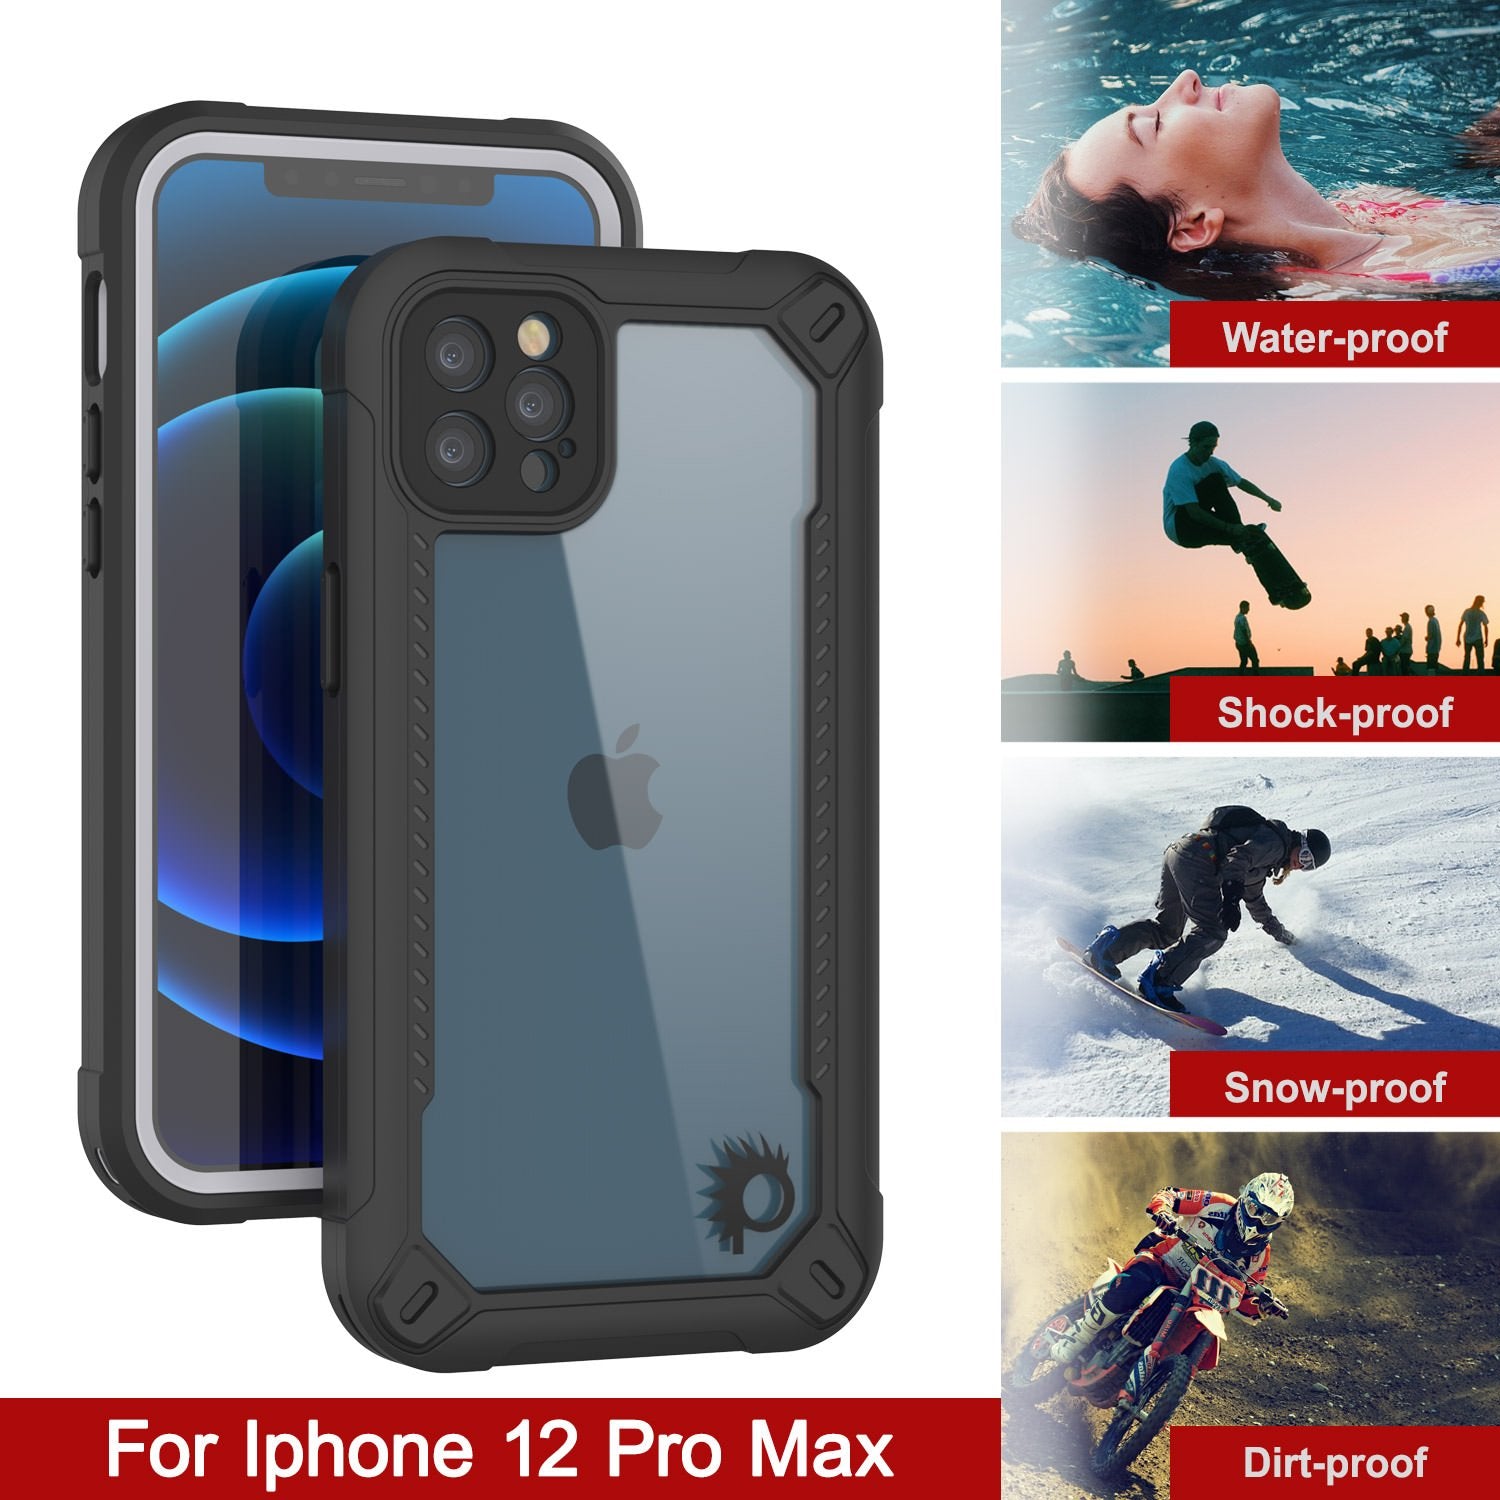 iPhone 12 Pro Max Waterproof IP68 Case, Punkcase [white]  [Maximus Series] [Slim Fit] [IP68 Certified] [Shockresistant] Clear Armor Cover with Screen Protector | Ultimate Protection